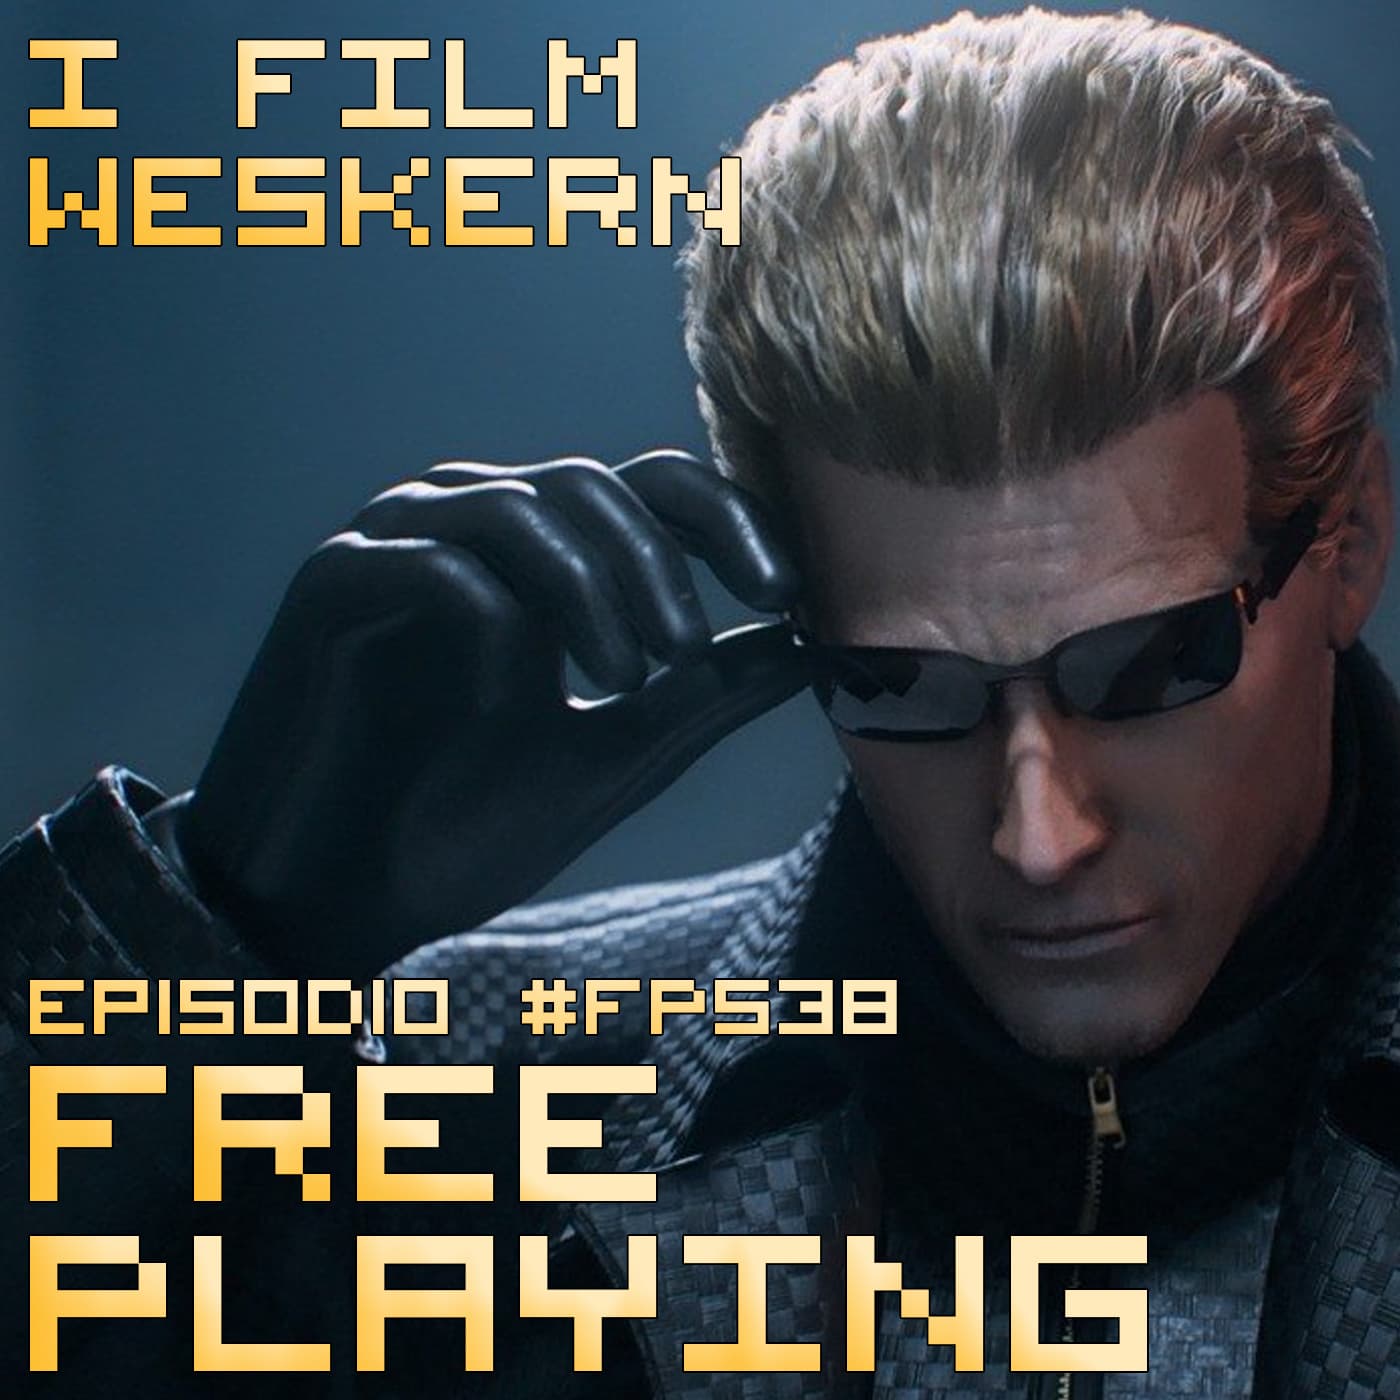 Free Playing #FP538: I FILM WESKERN